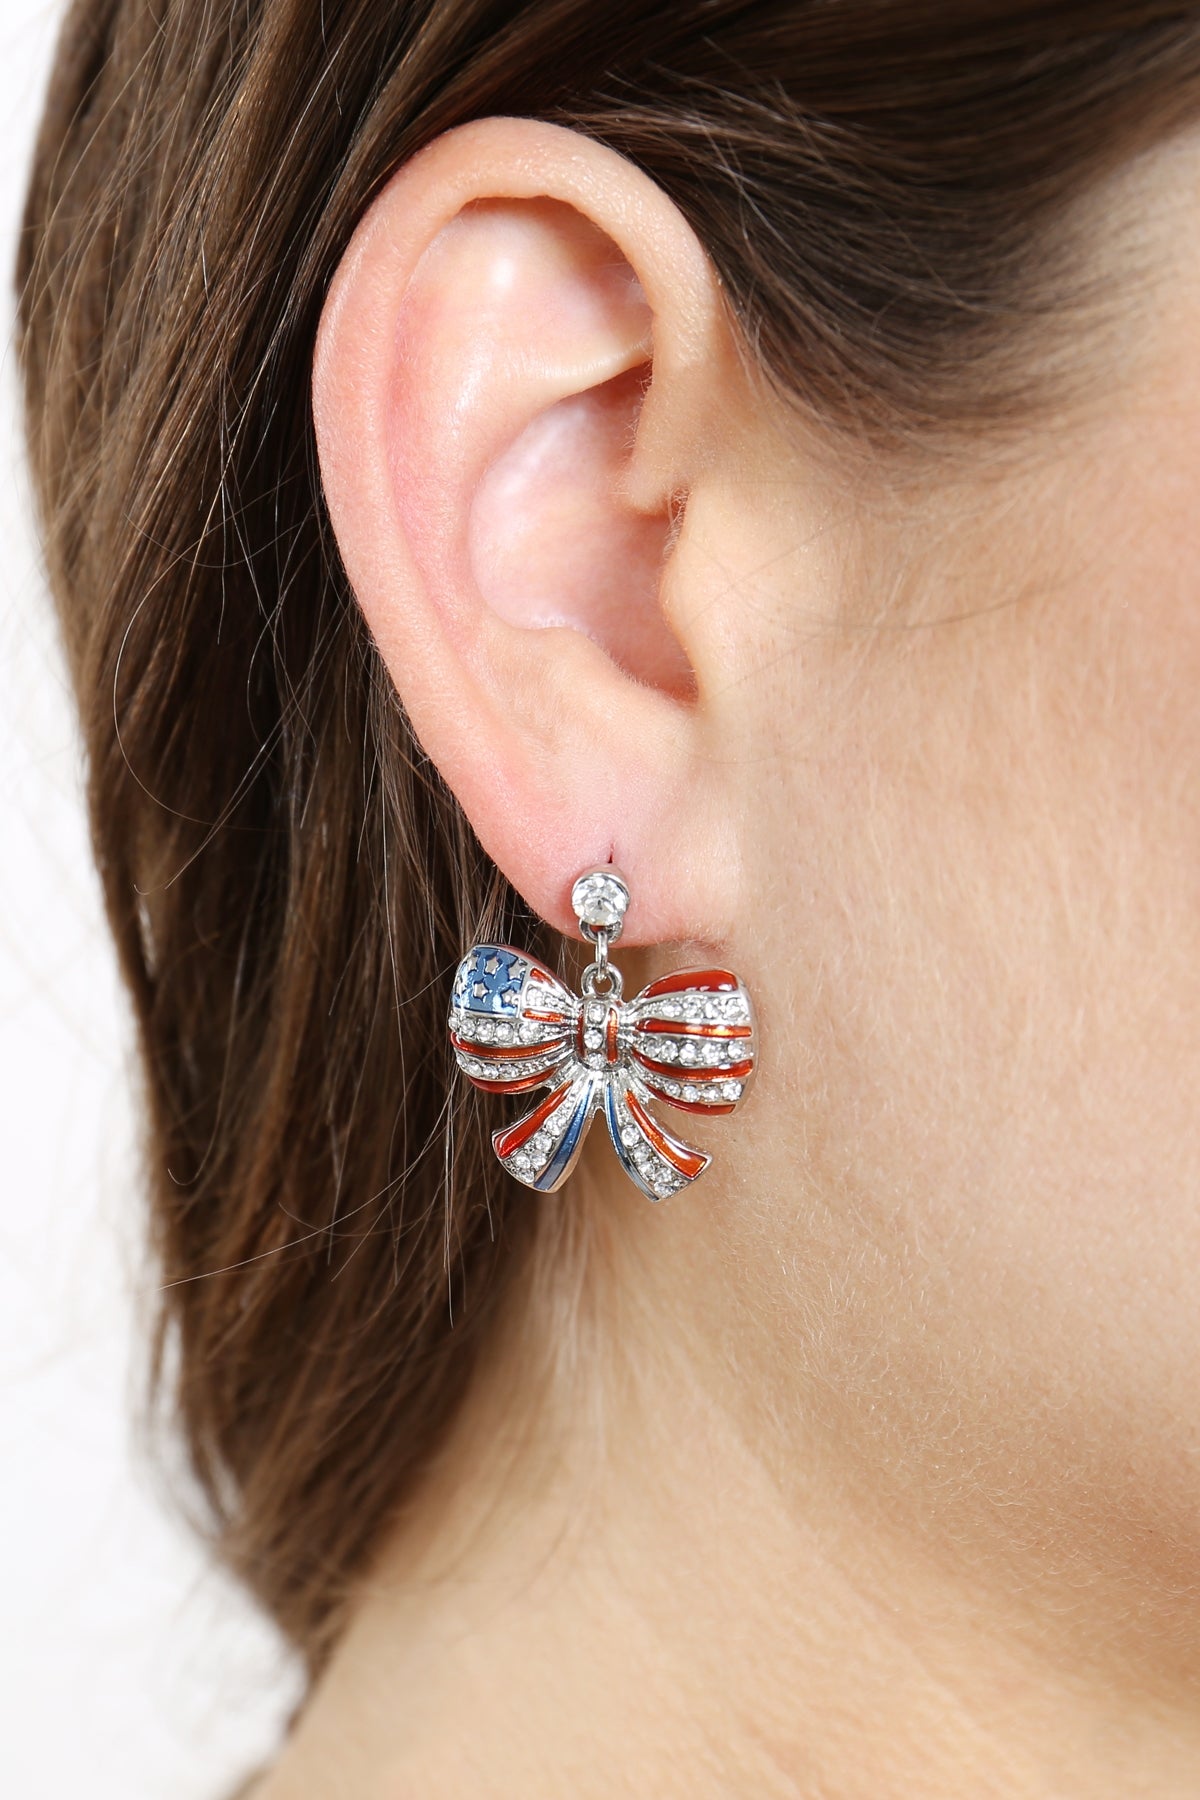 AMERICAN FLAG RIBBON ACCENT EARRINGS